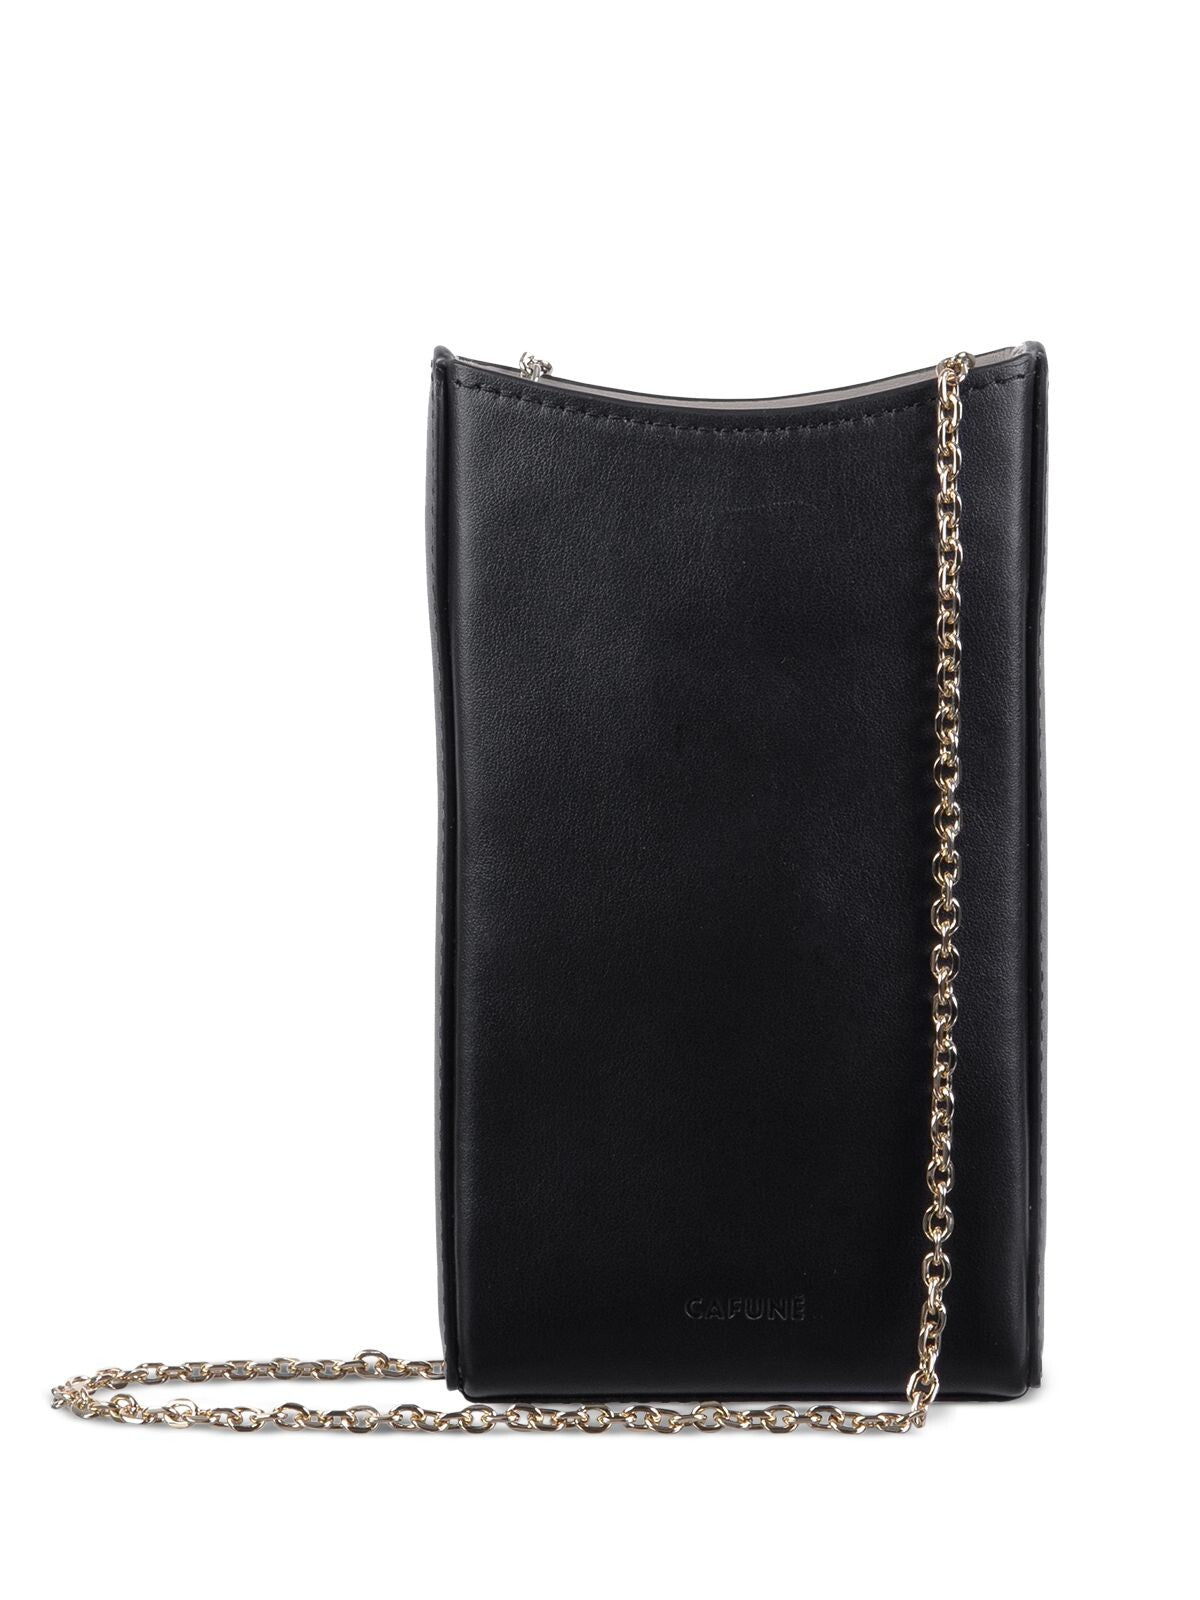 CAFUNE Women's Black Leather Chain Strap Phone Pouch